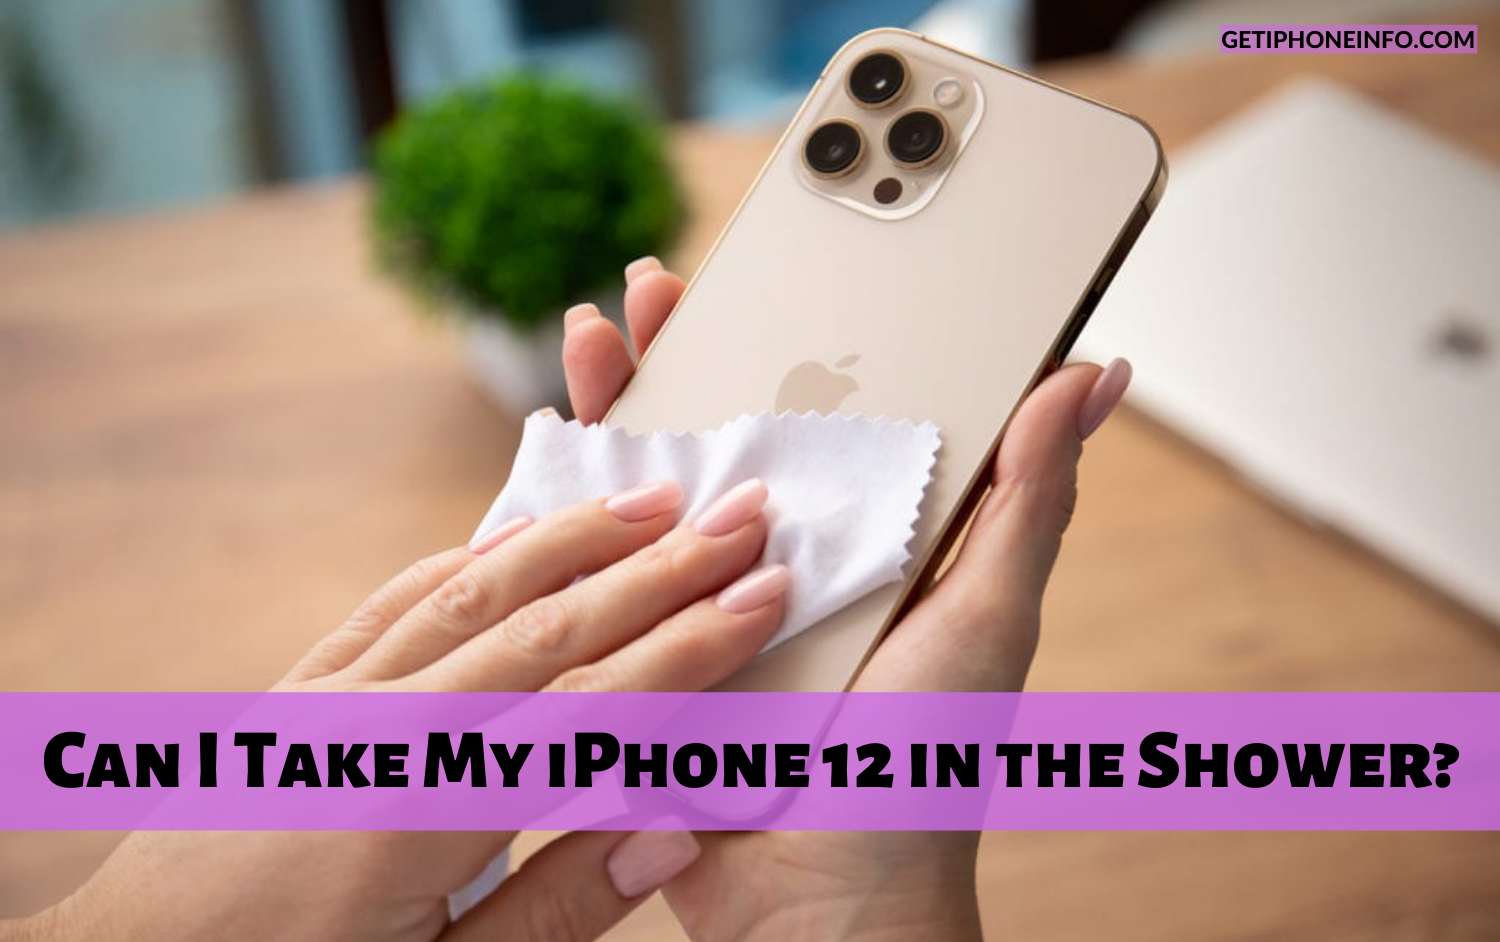 Can I Take My iPhone 12 in the Shower